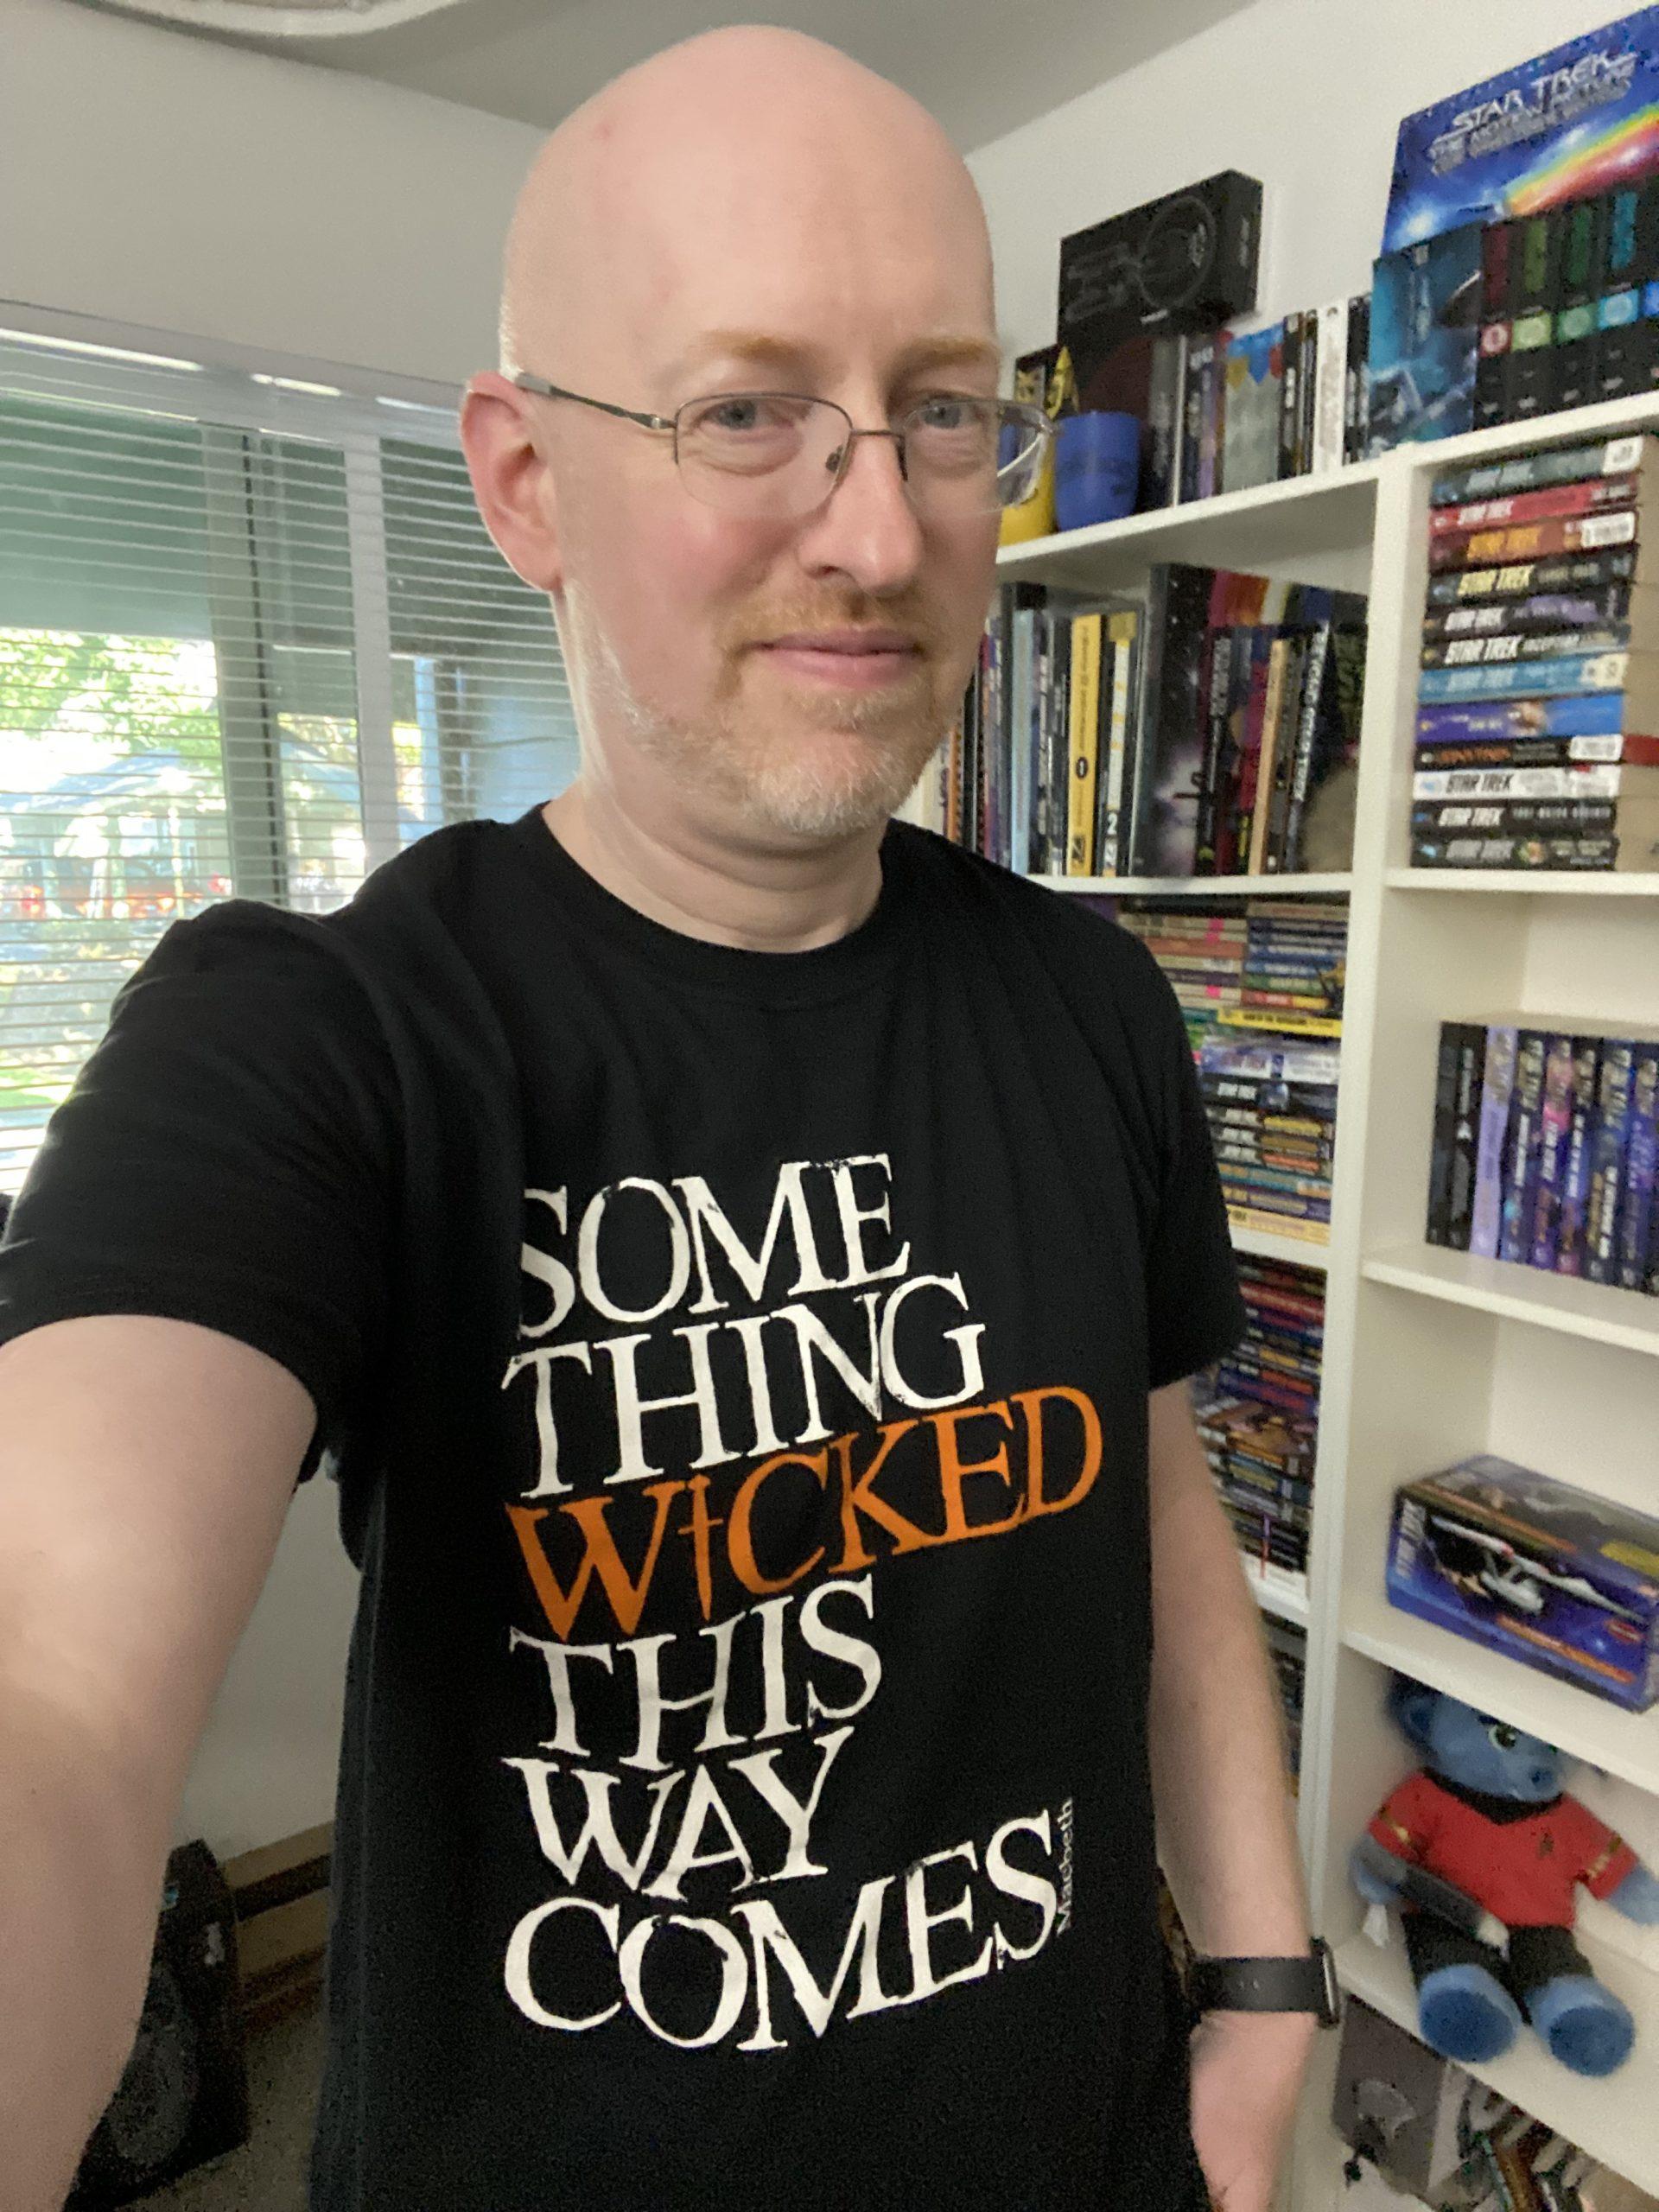 Me wearing a black t-shirt with slightly distressed white text that says 'something wicked this way comes'; the word 'wicked' is printed in orange.